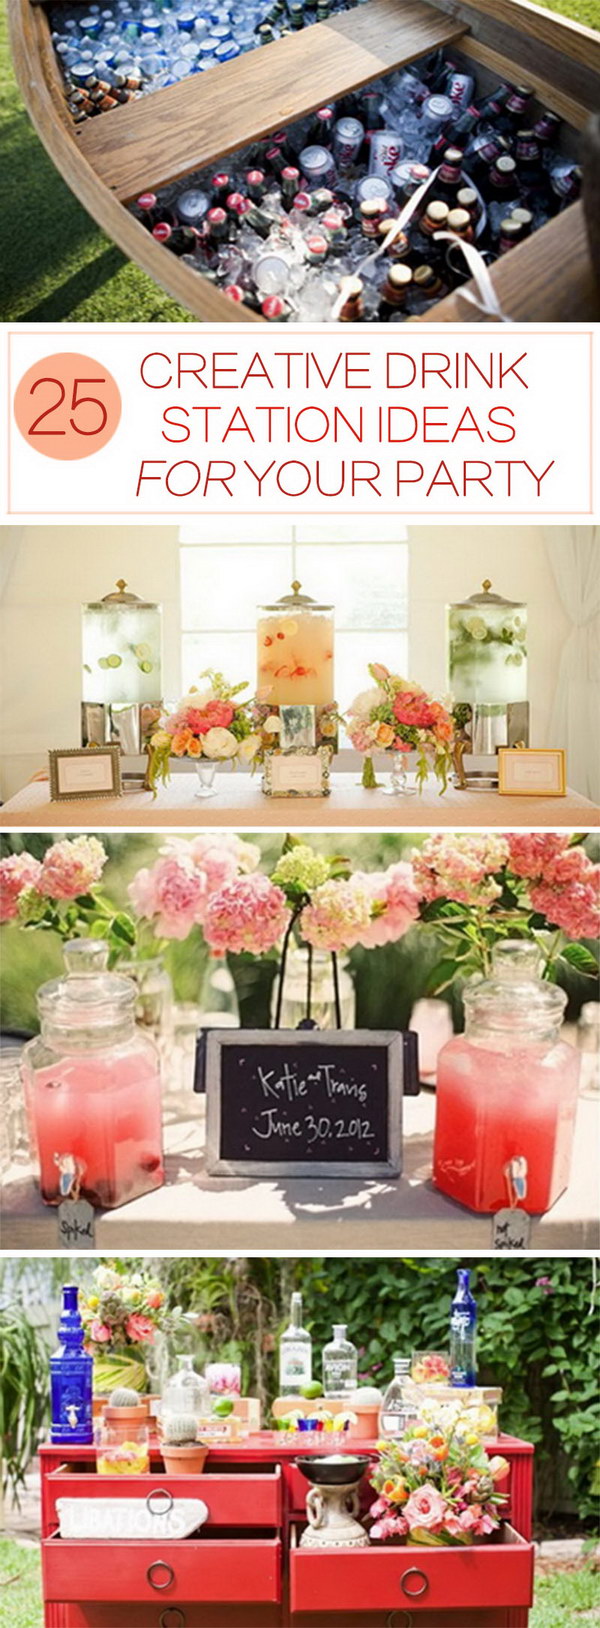 Creative Drink Station Ideas for Your Party.